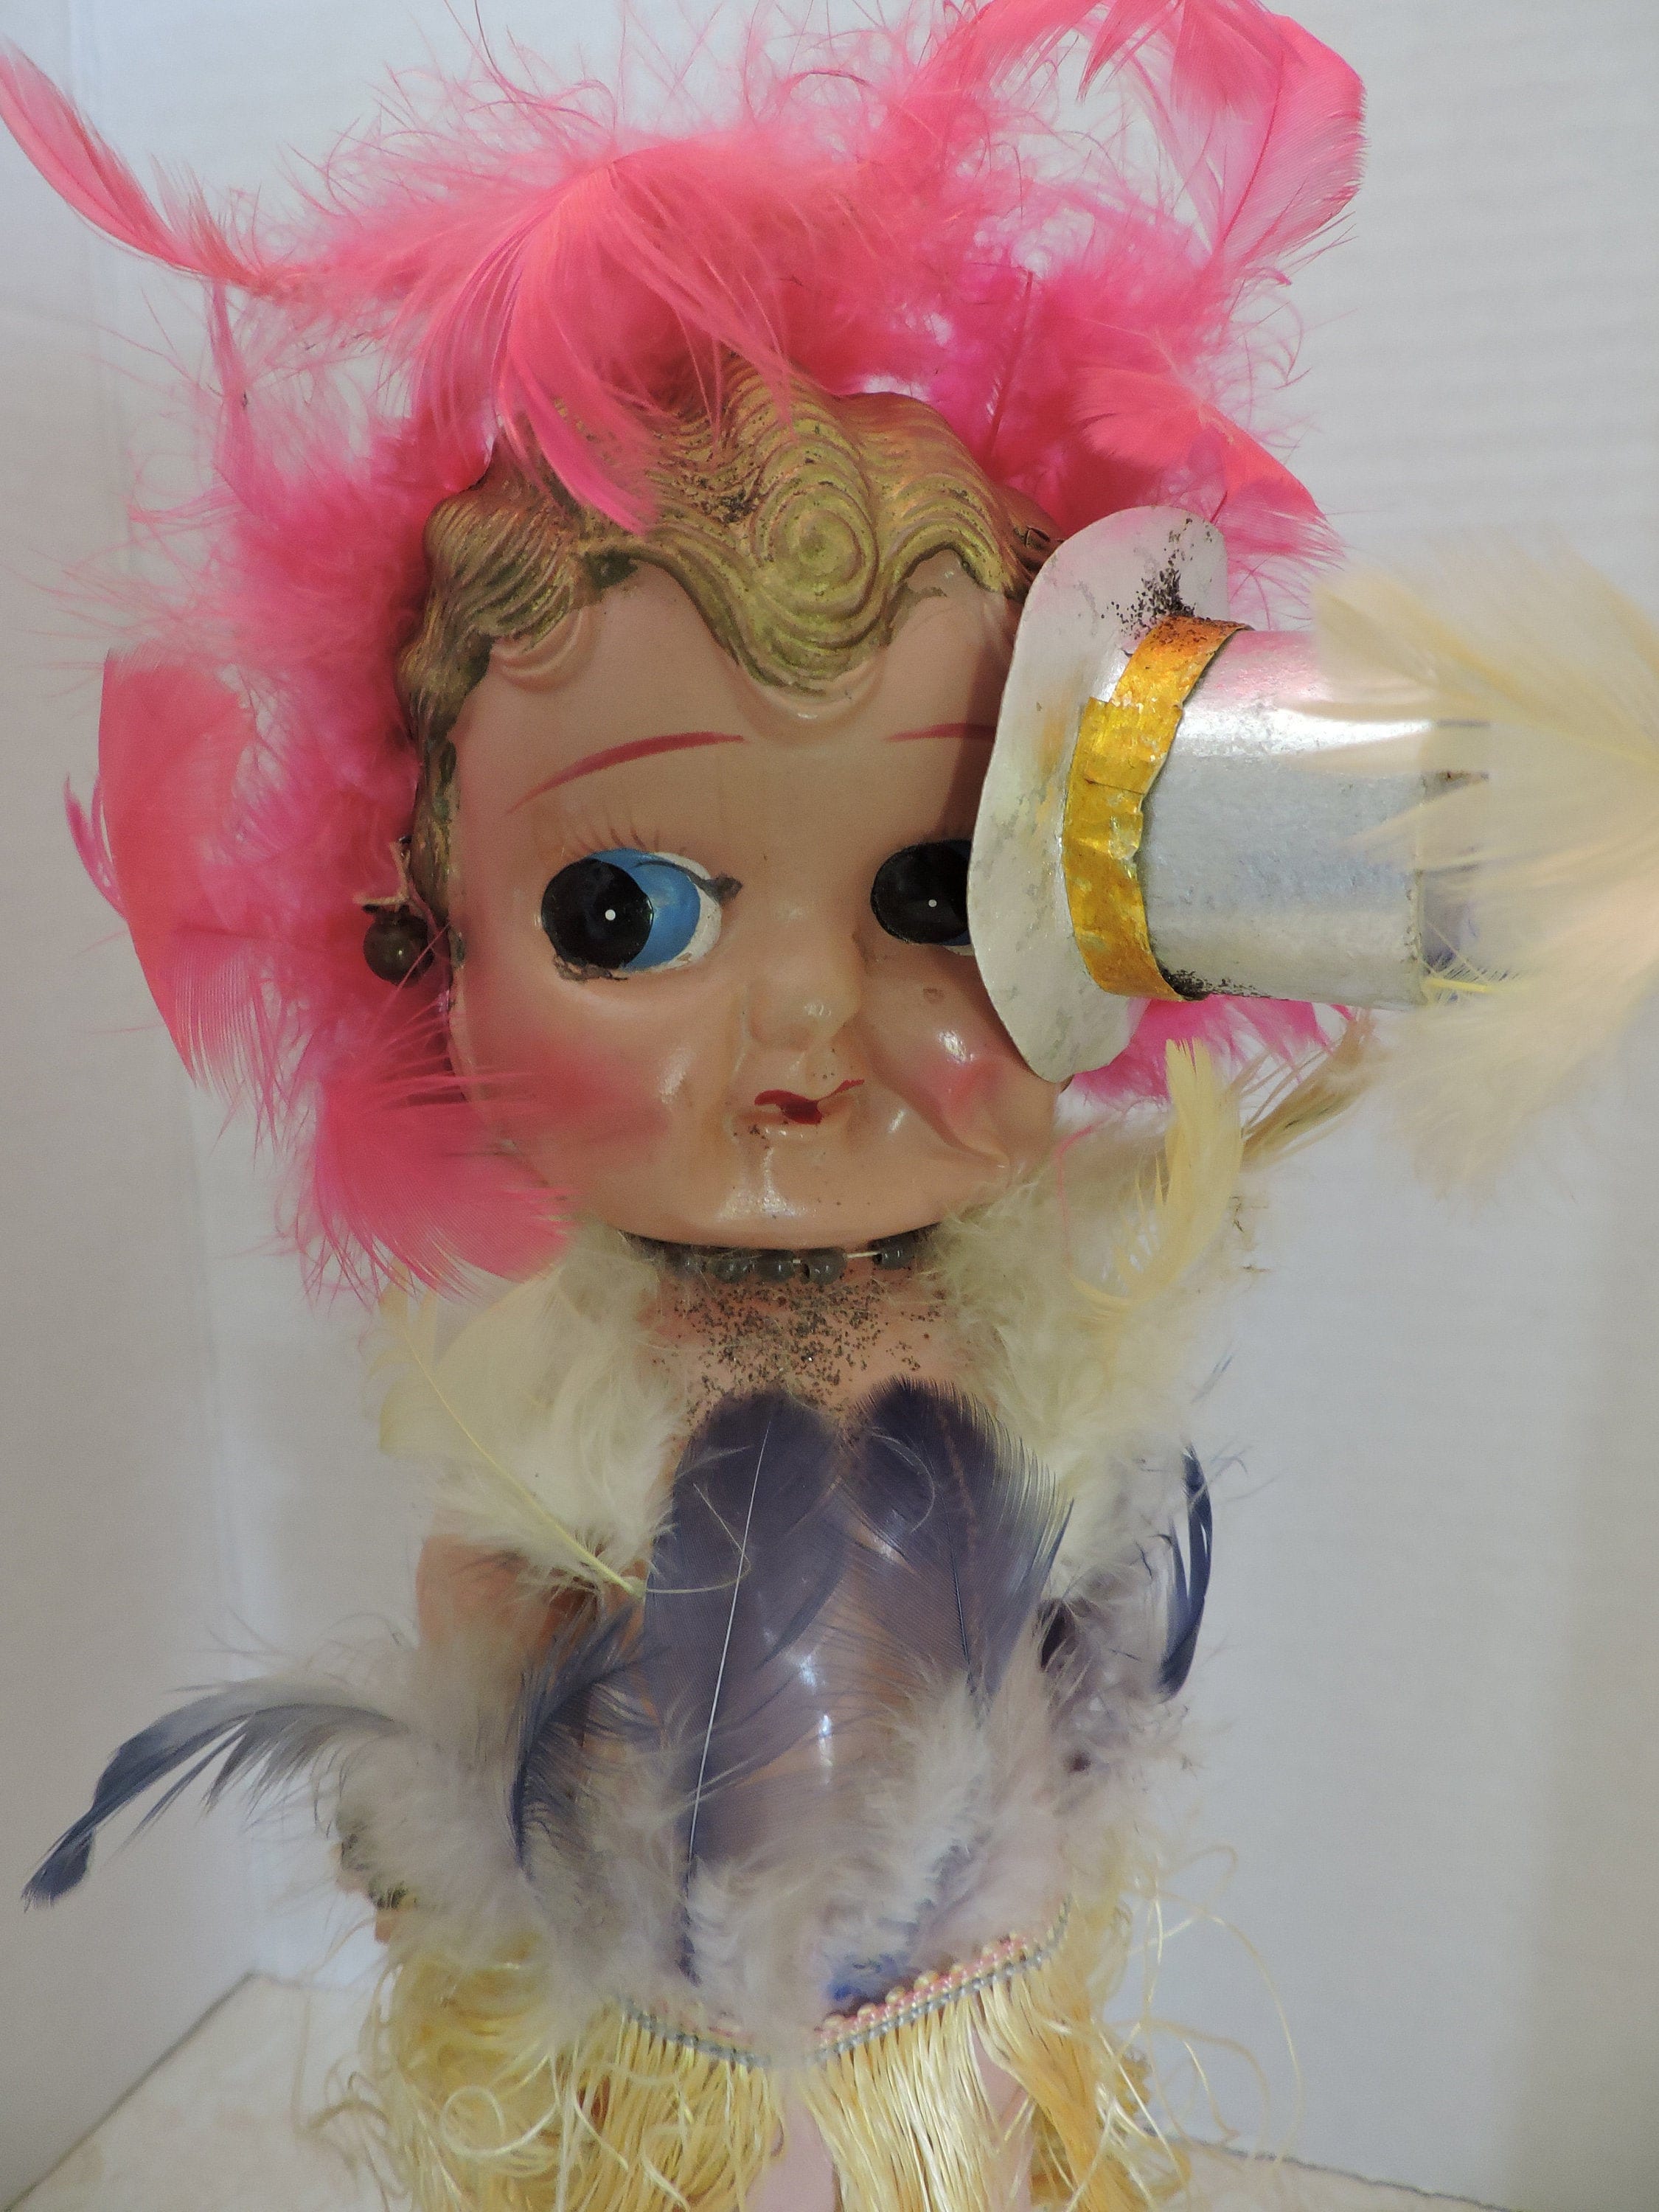 Kewpie Carnival Doll Vintage Celluloid Jointed Pink and White Feathers  Wears Hula Skirt Promotion Collectible Dolls as is Condition 